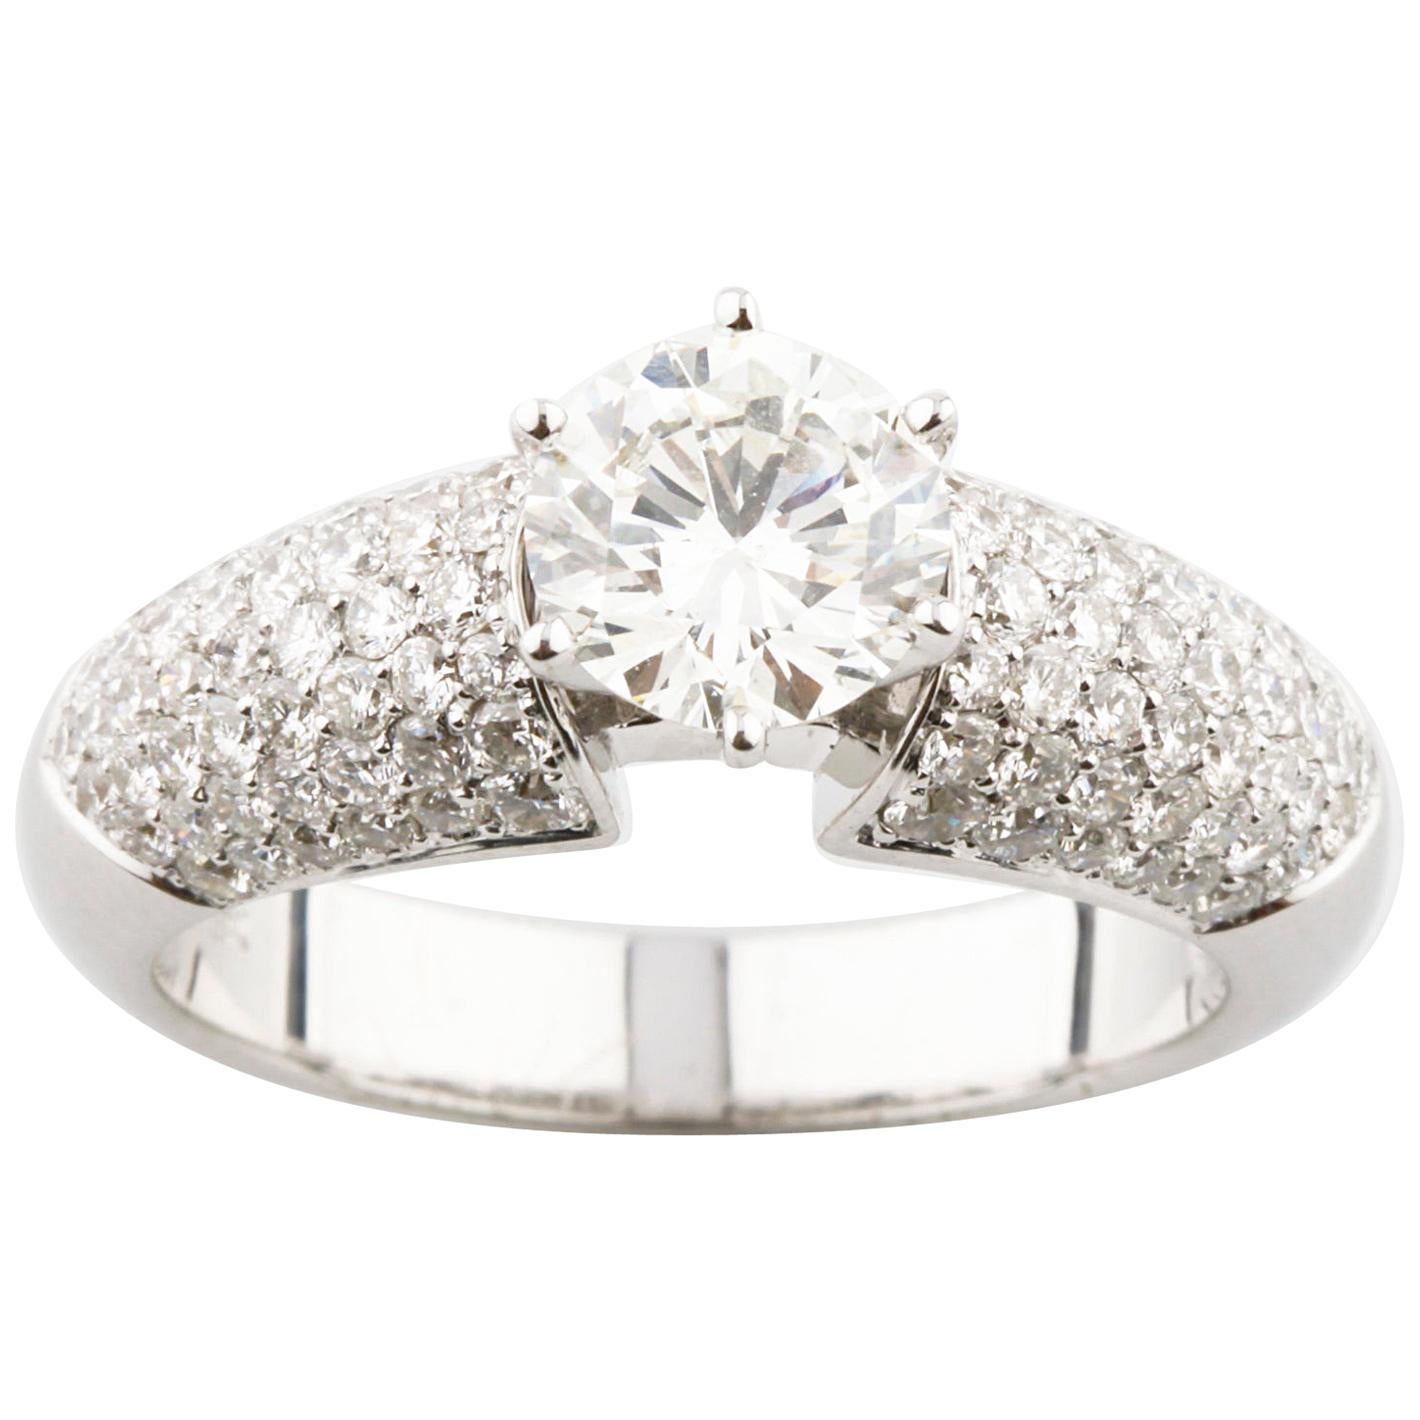 1.12 Carat Round Diamond Solitaire Ring with Pave Accents in White Gold For Sale